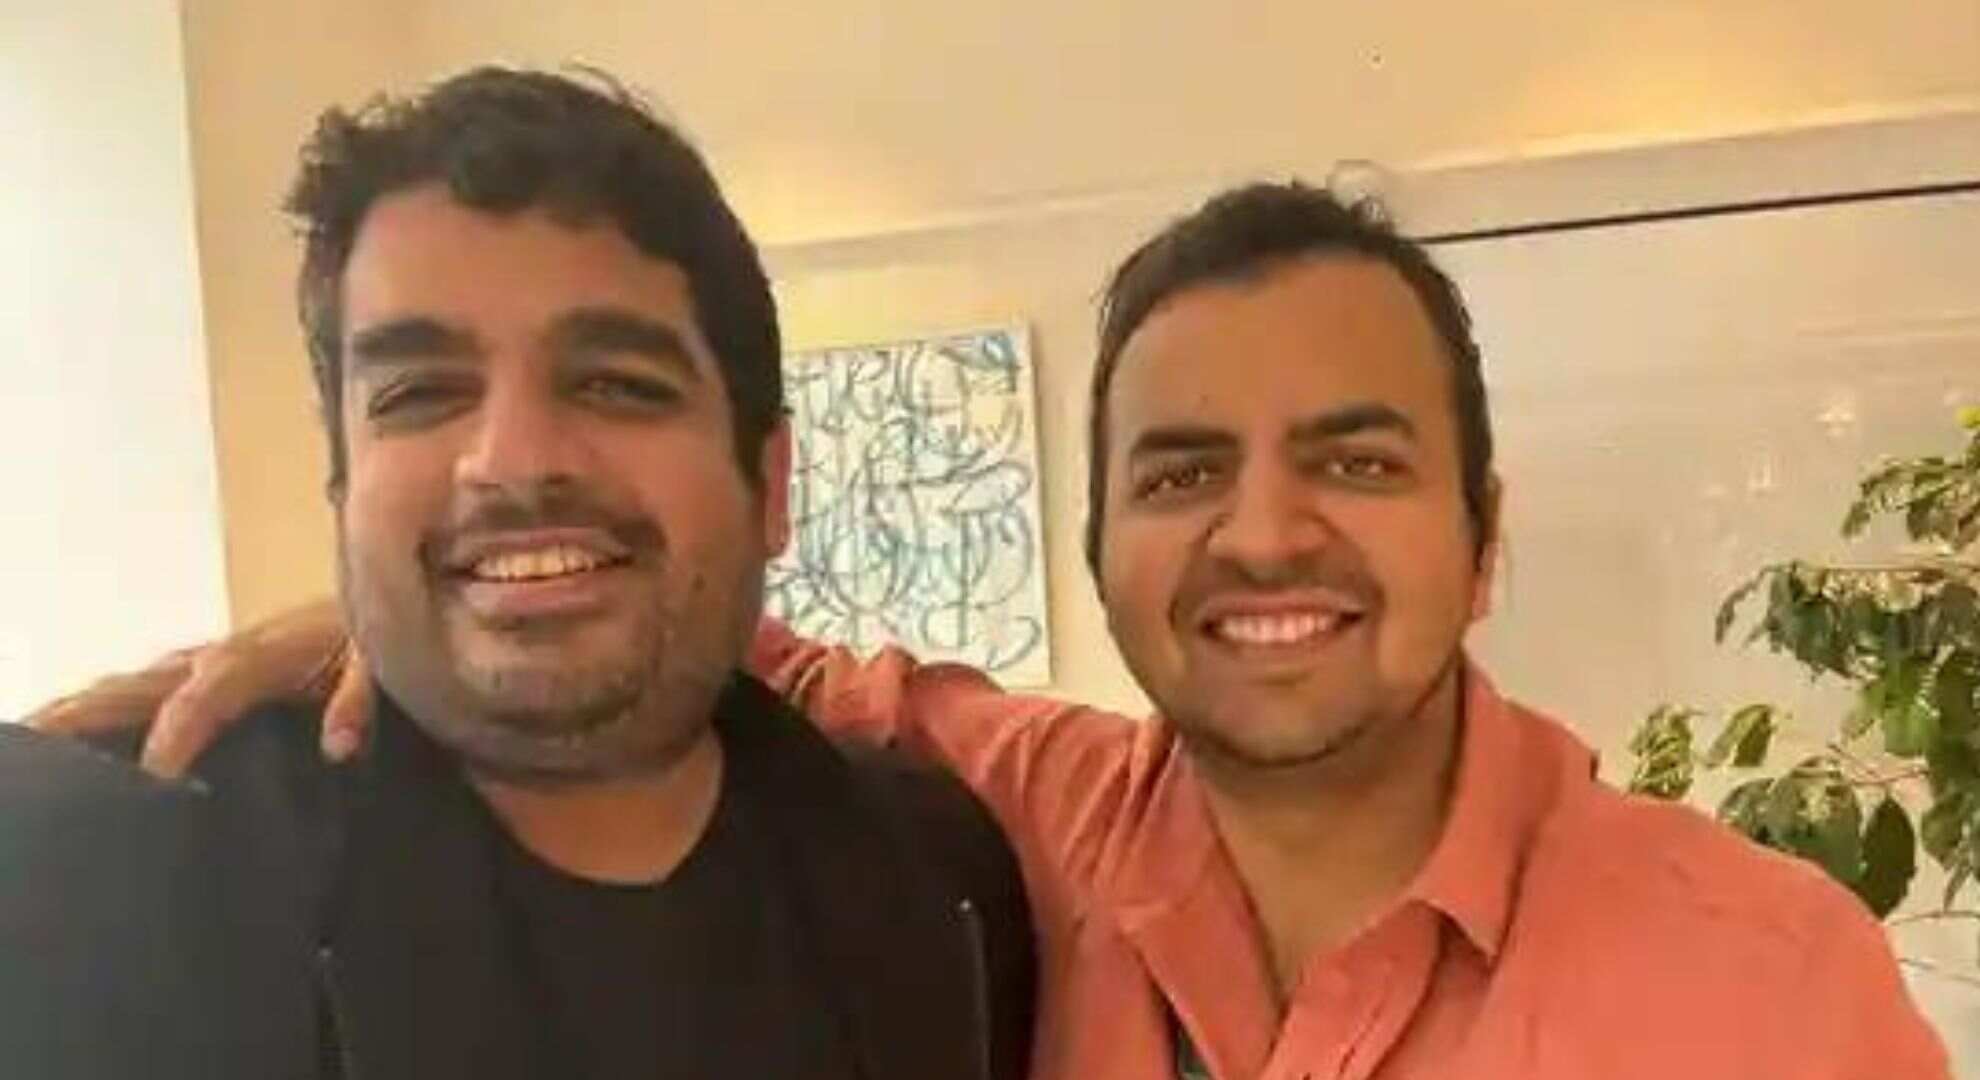 CEOs Of Swiggy, Ola And Unacademy Meet For Coffee In Bengaluru